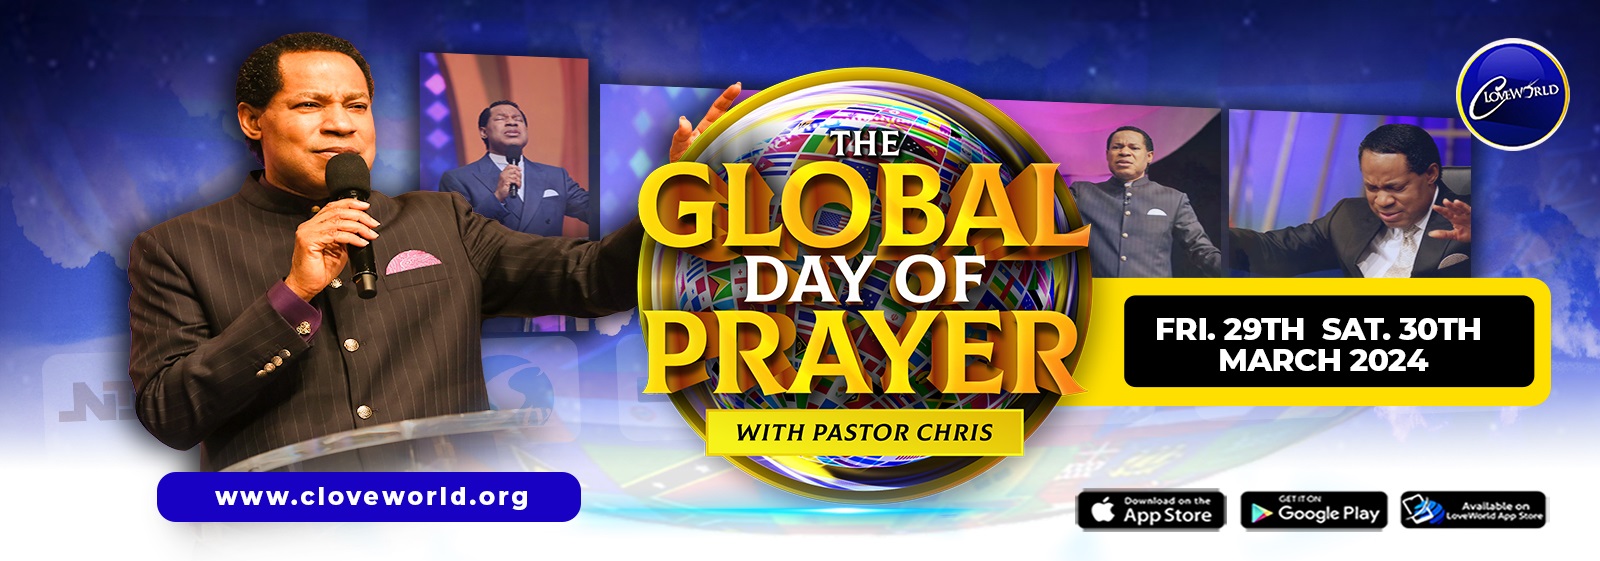 THE GLOBAL DAY OF PRAYER WITH PASTOR CHRIS 